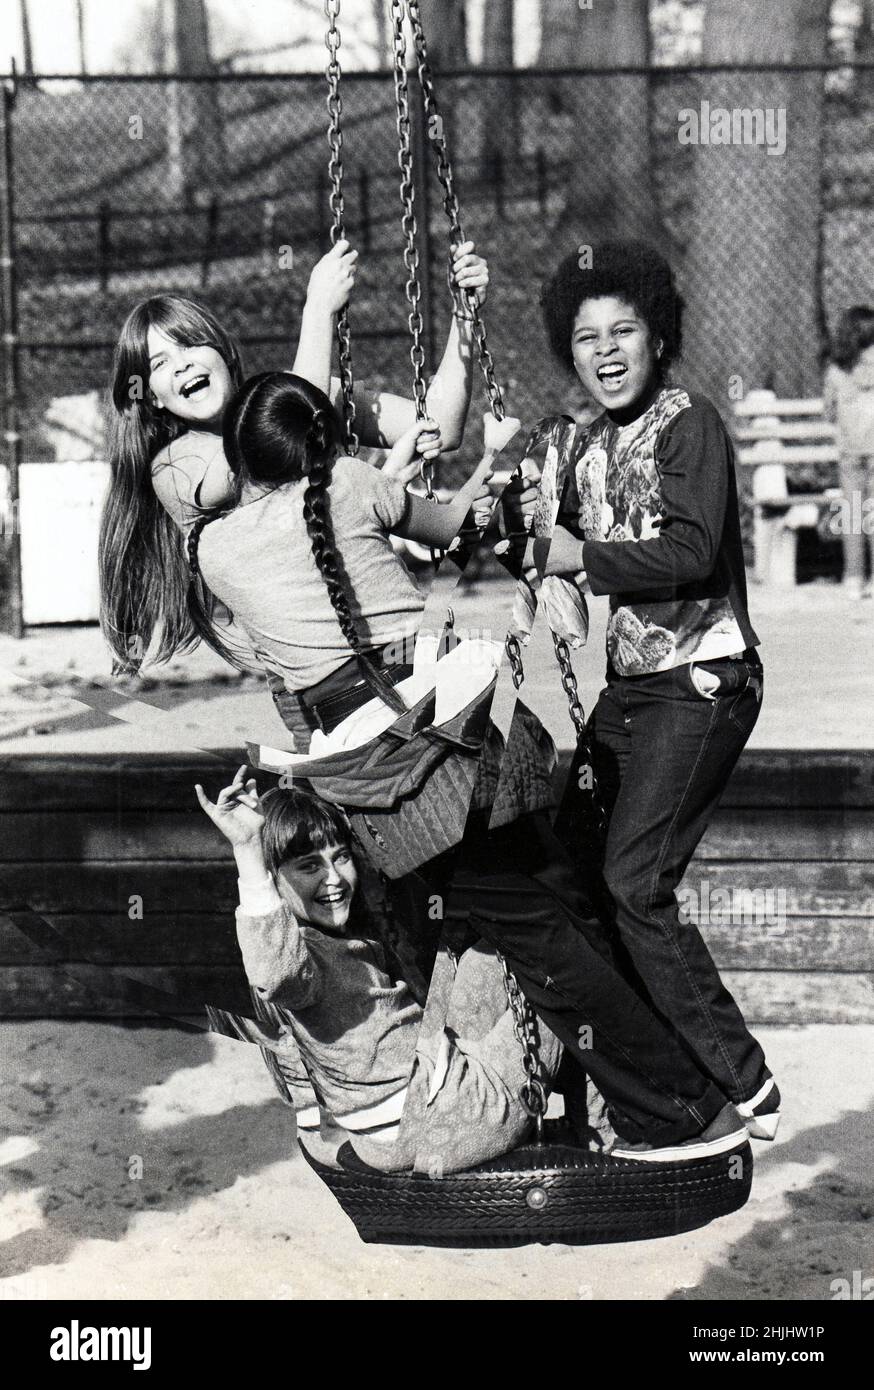 4 girls, likely teenagers, smile and have fun on a tire swing in the 3rd Street playground in Prospect Park, Brooklyn, New York City. Circa 1977. Stock Photo